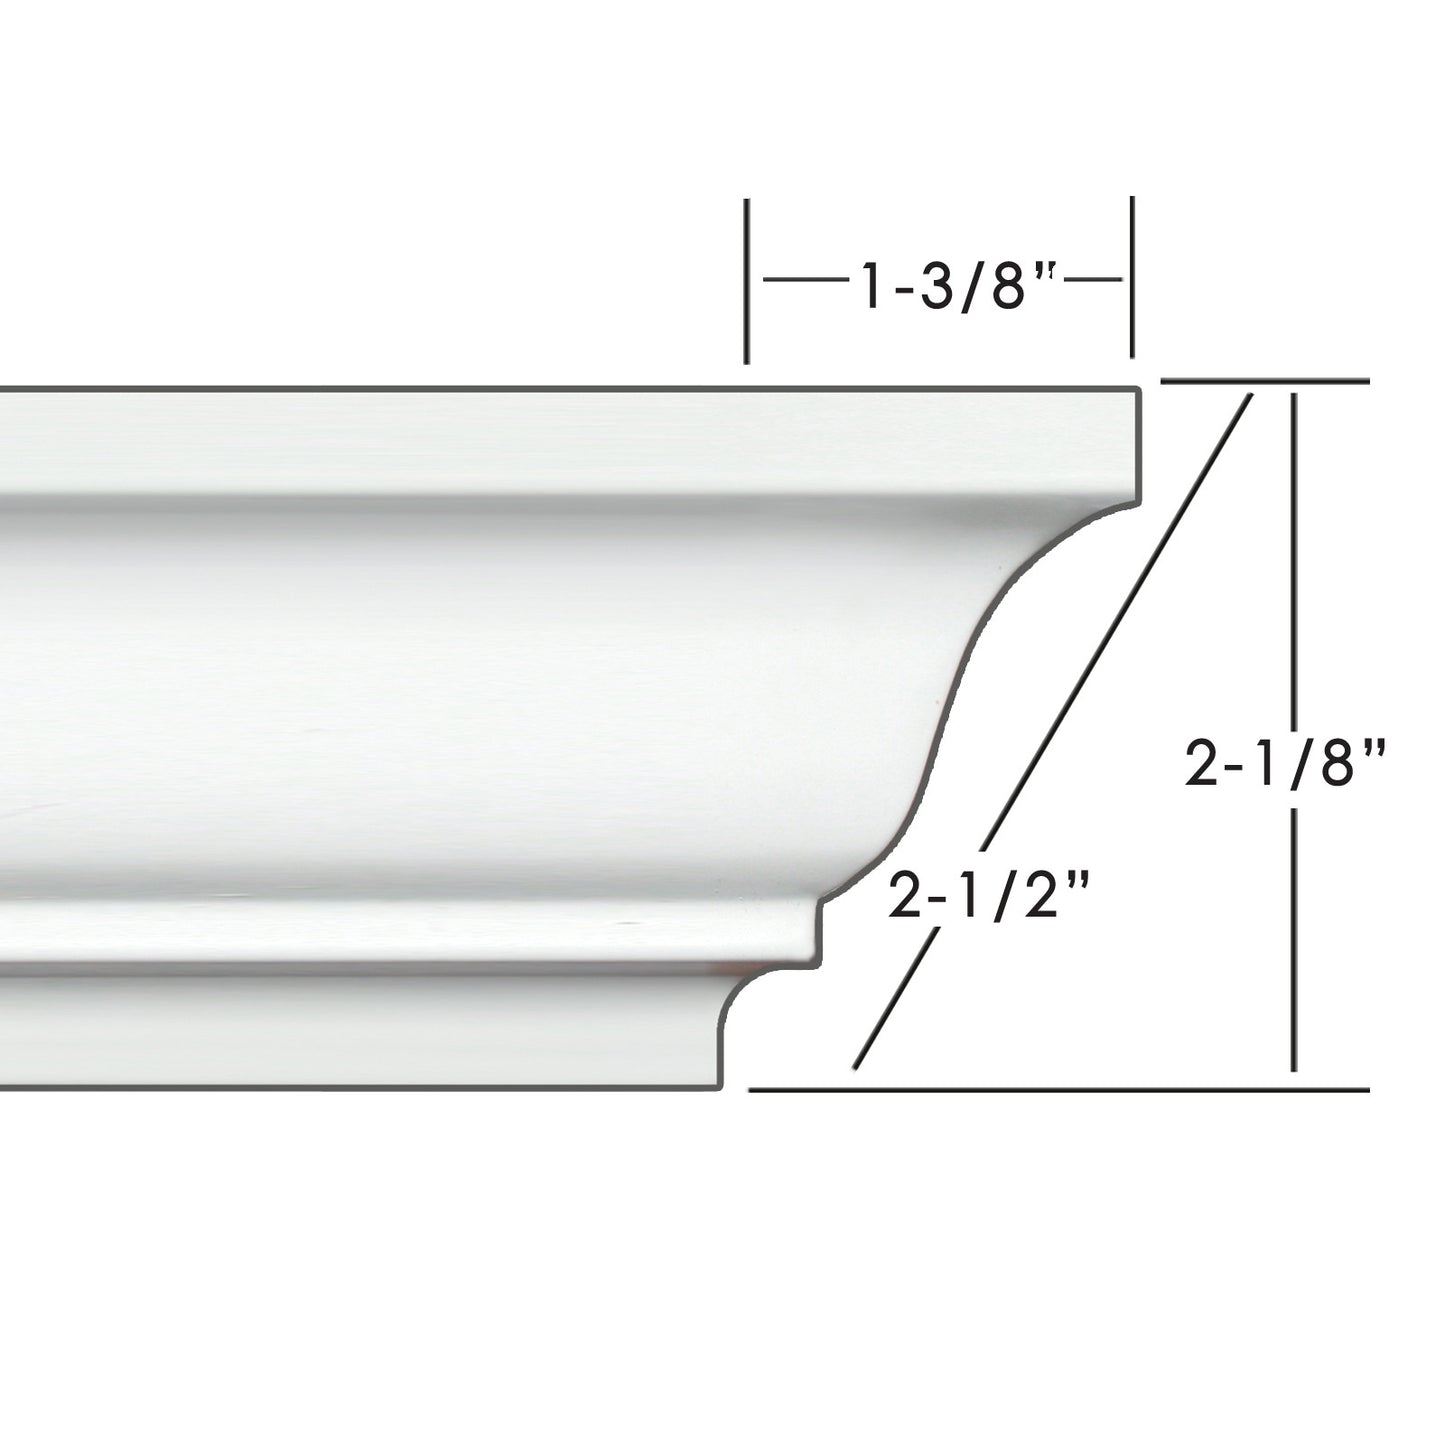 dimensions of crown molding